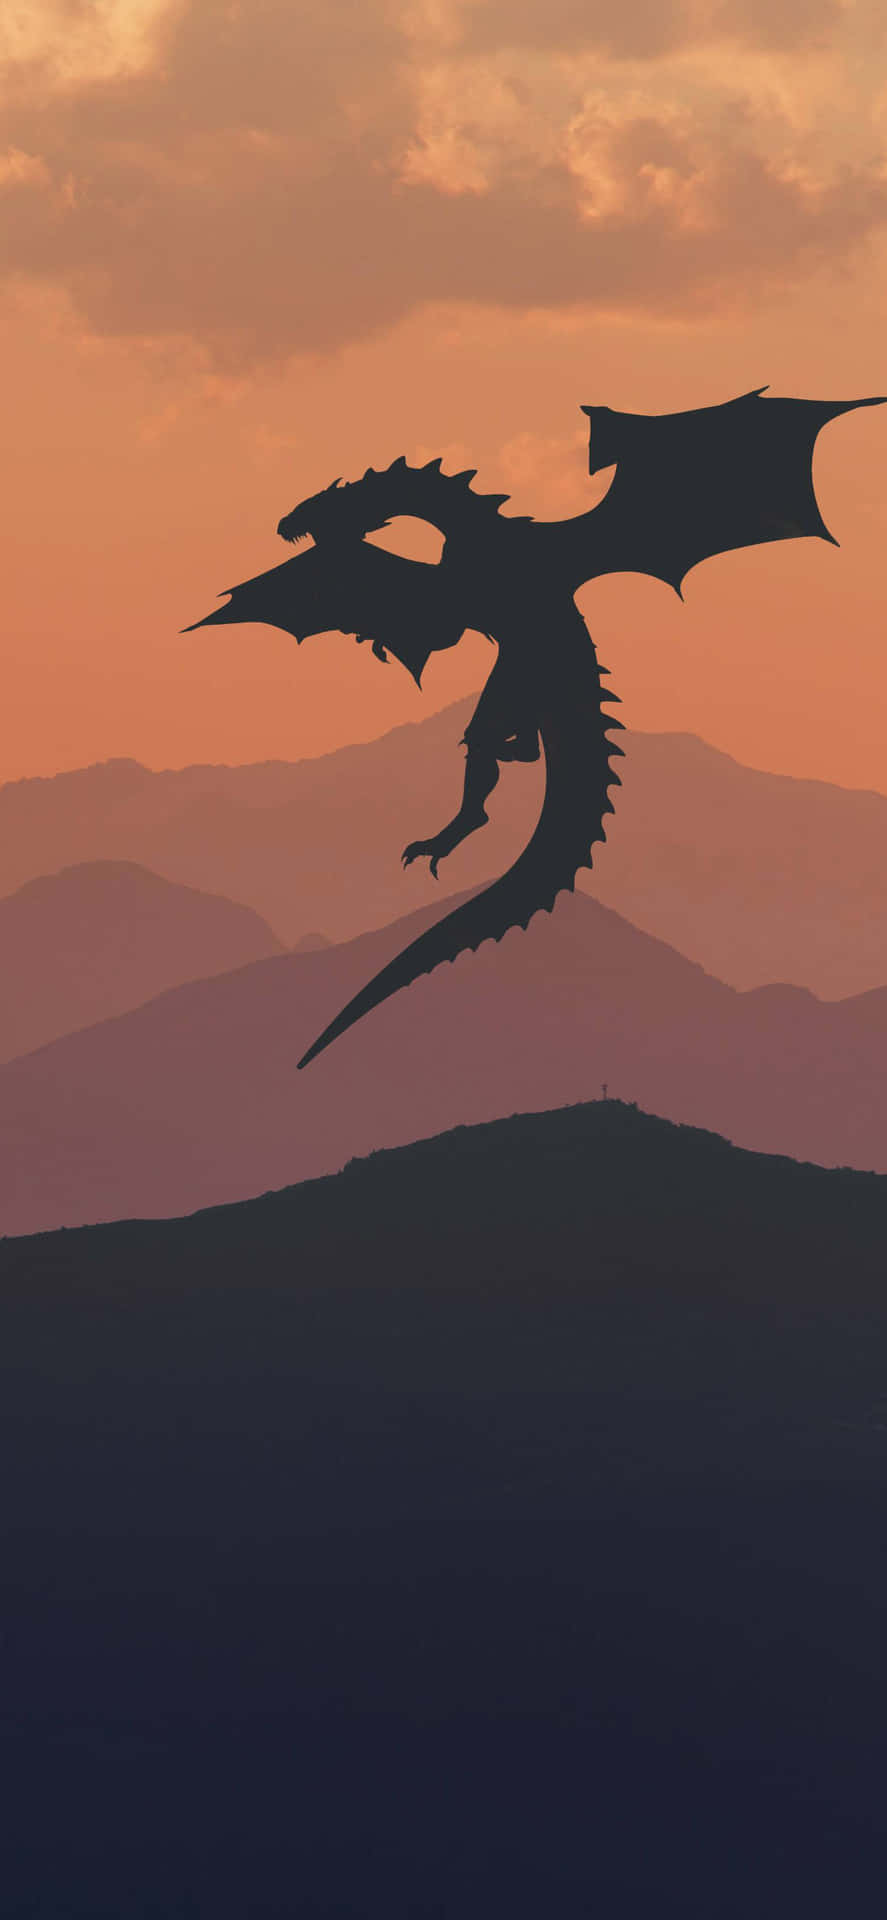 Rediscover the world of Westeros through the Game of Thrones Iphone Wallpaper